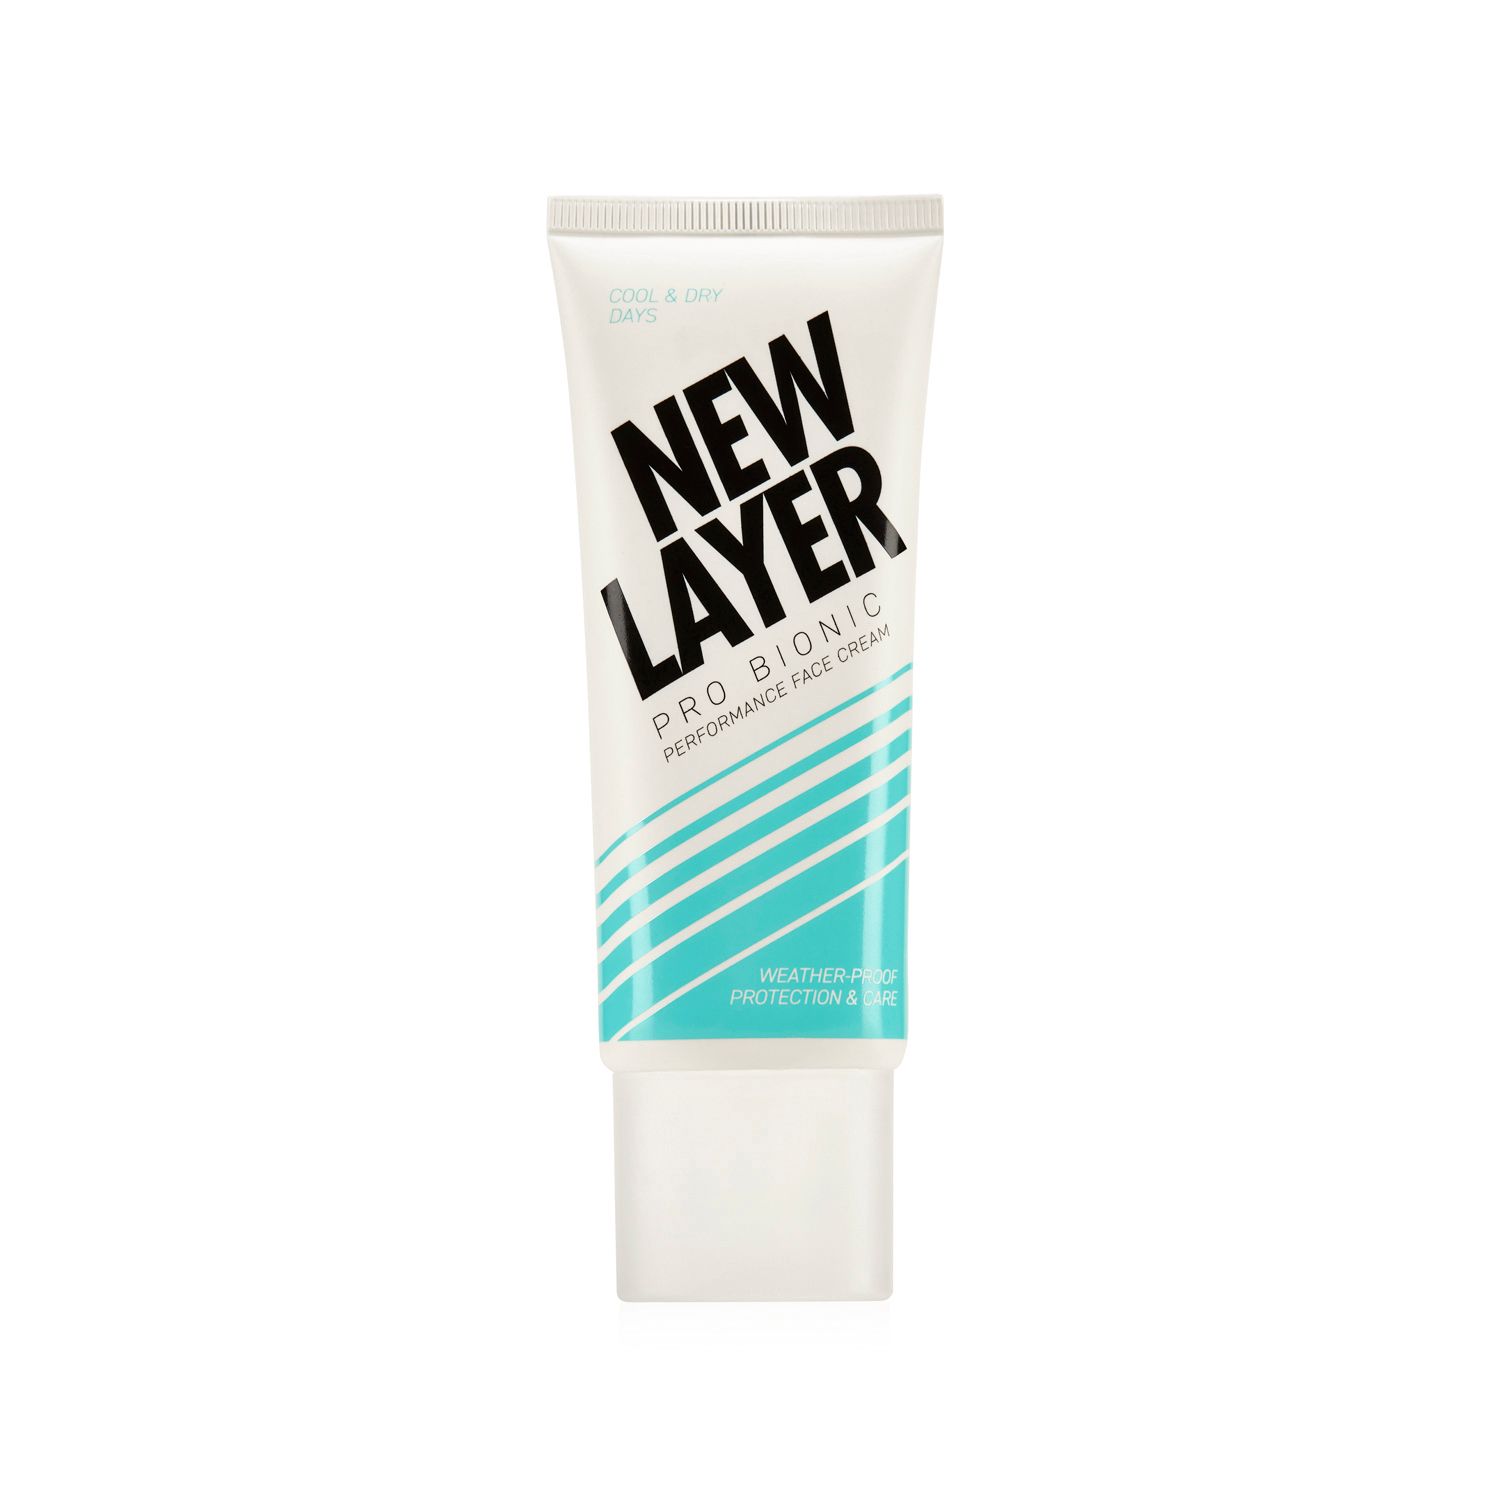 NEW LAYER Pro Bionic Performance Gesichtscreme Cool & Dry Days